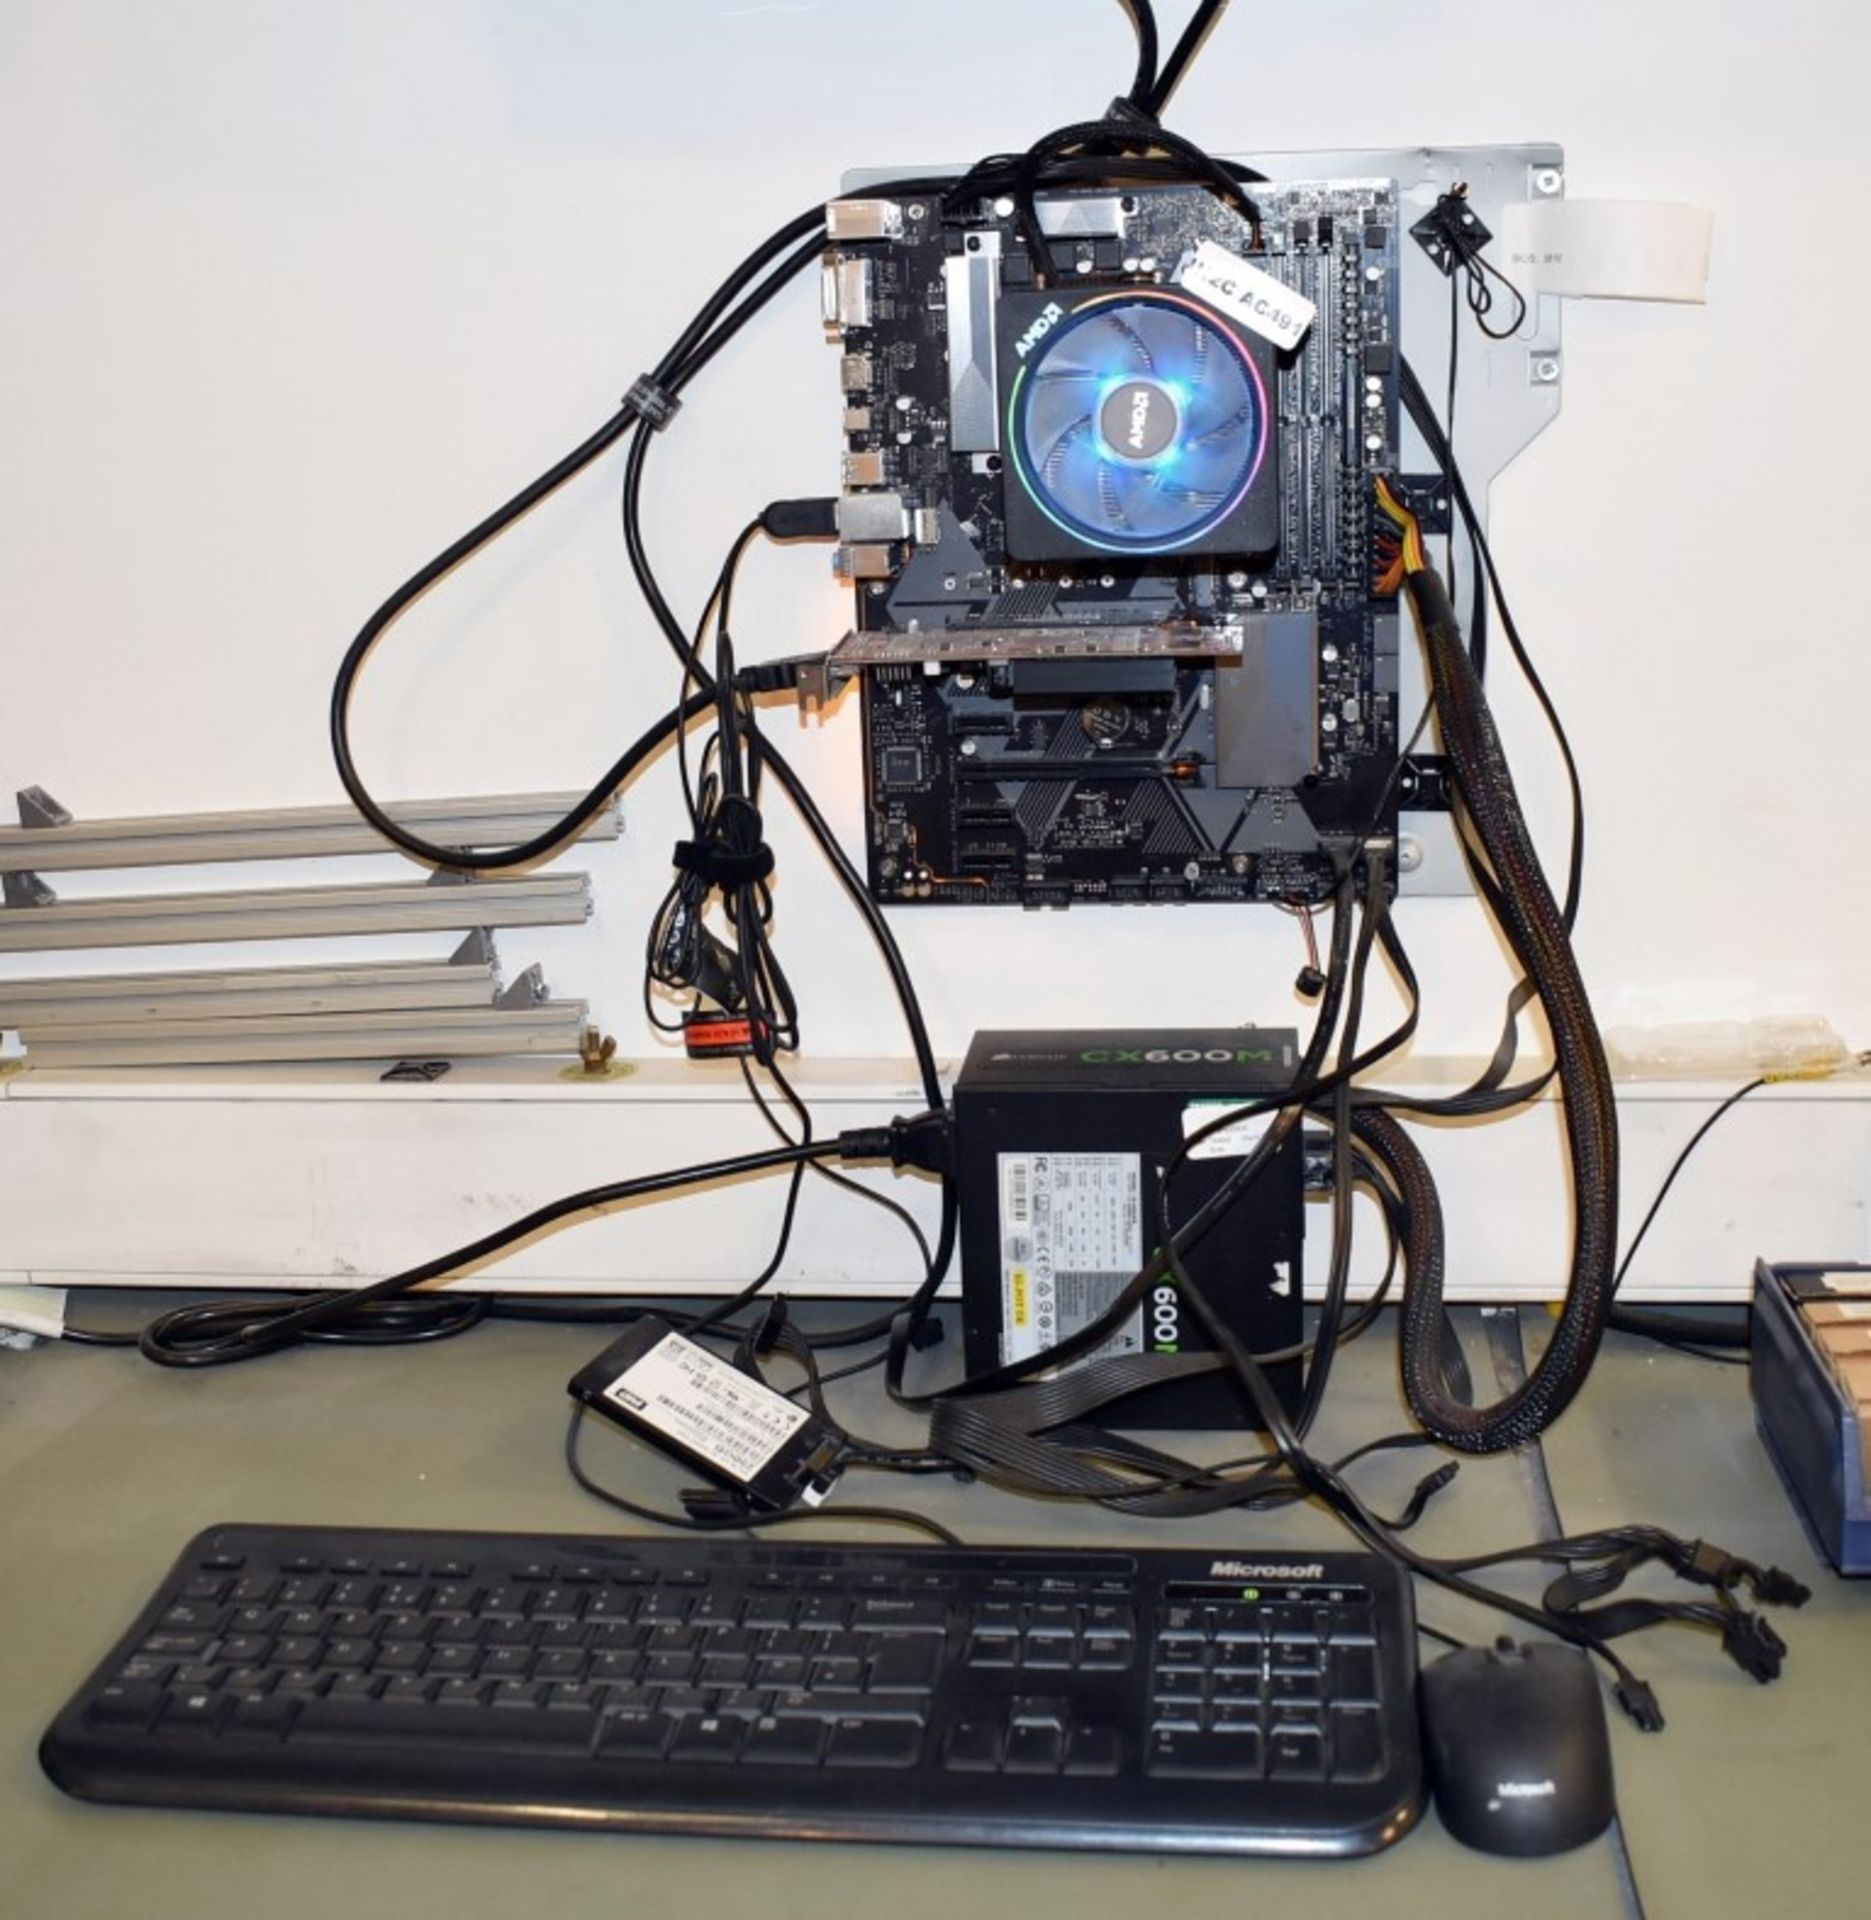 1 x Test Bench PC Components Including an Asus Prime B450-Plus Motherboard & Ryzen 3600XT CPU - Image 20 of 20